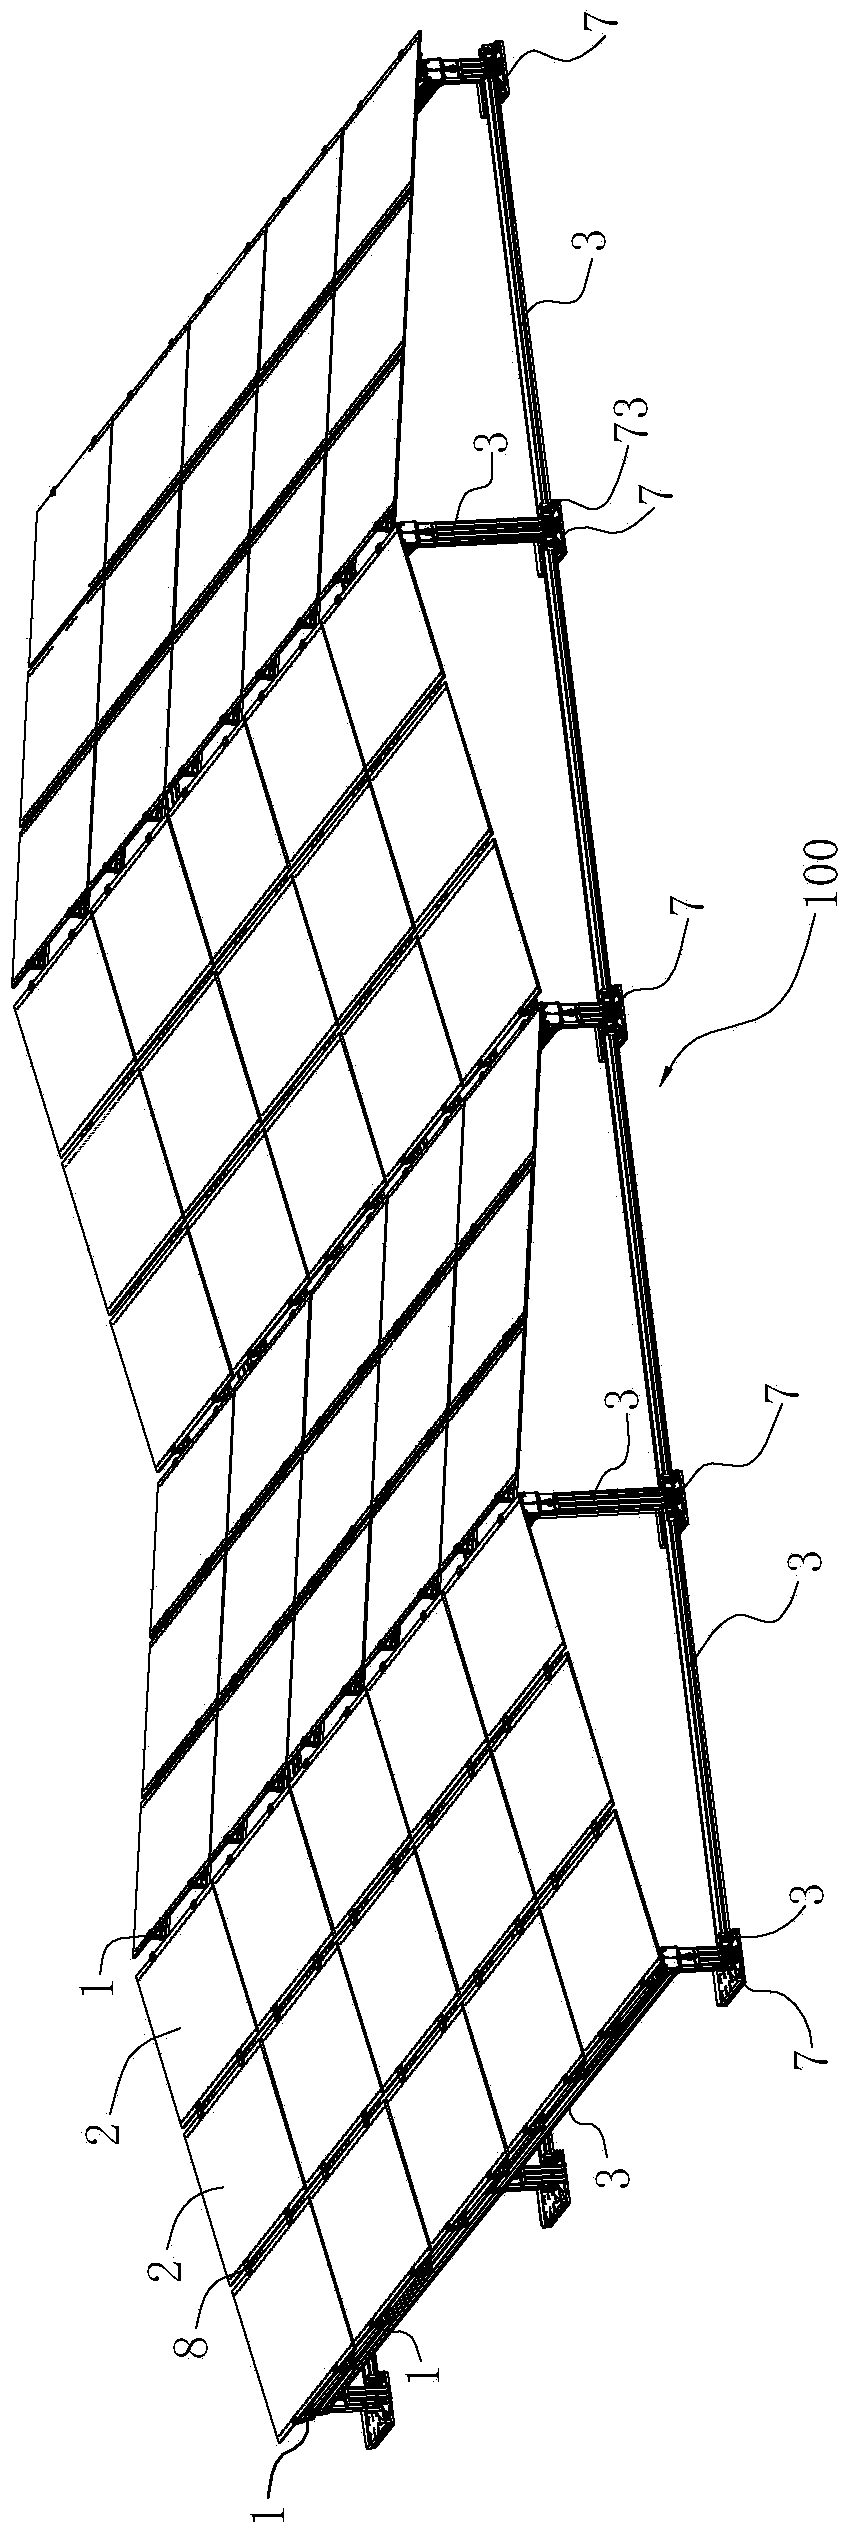 Connecting piece and solar panel installation support with same